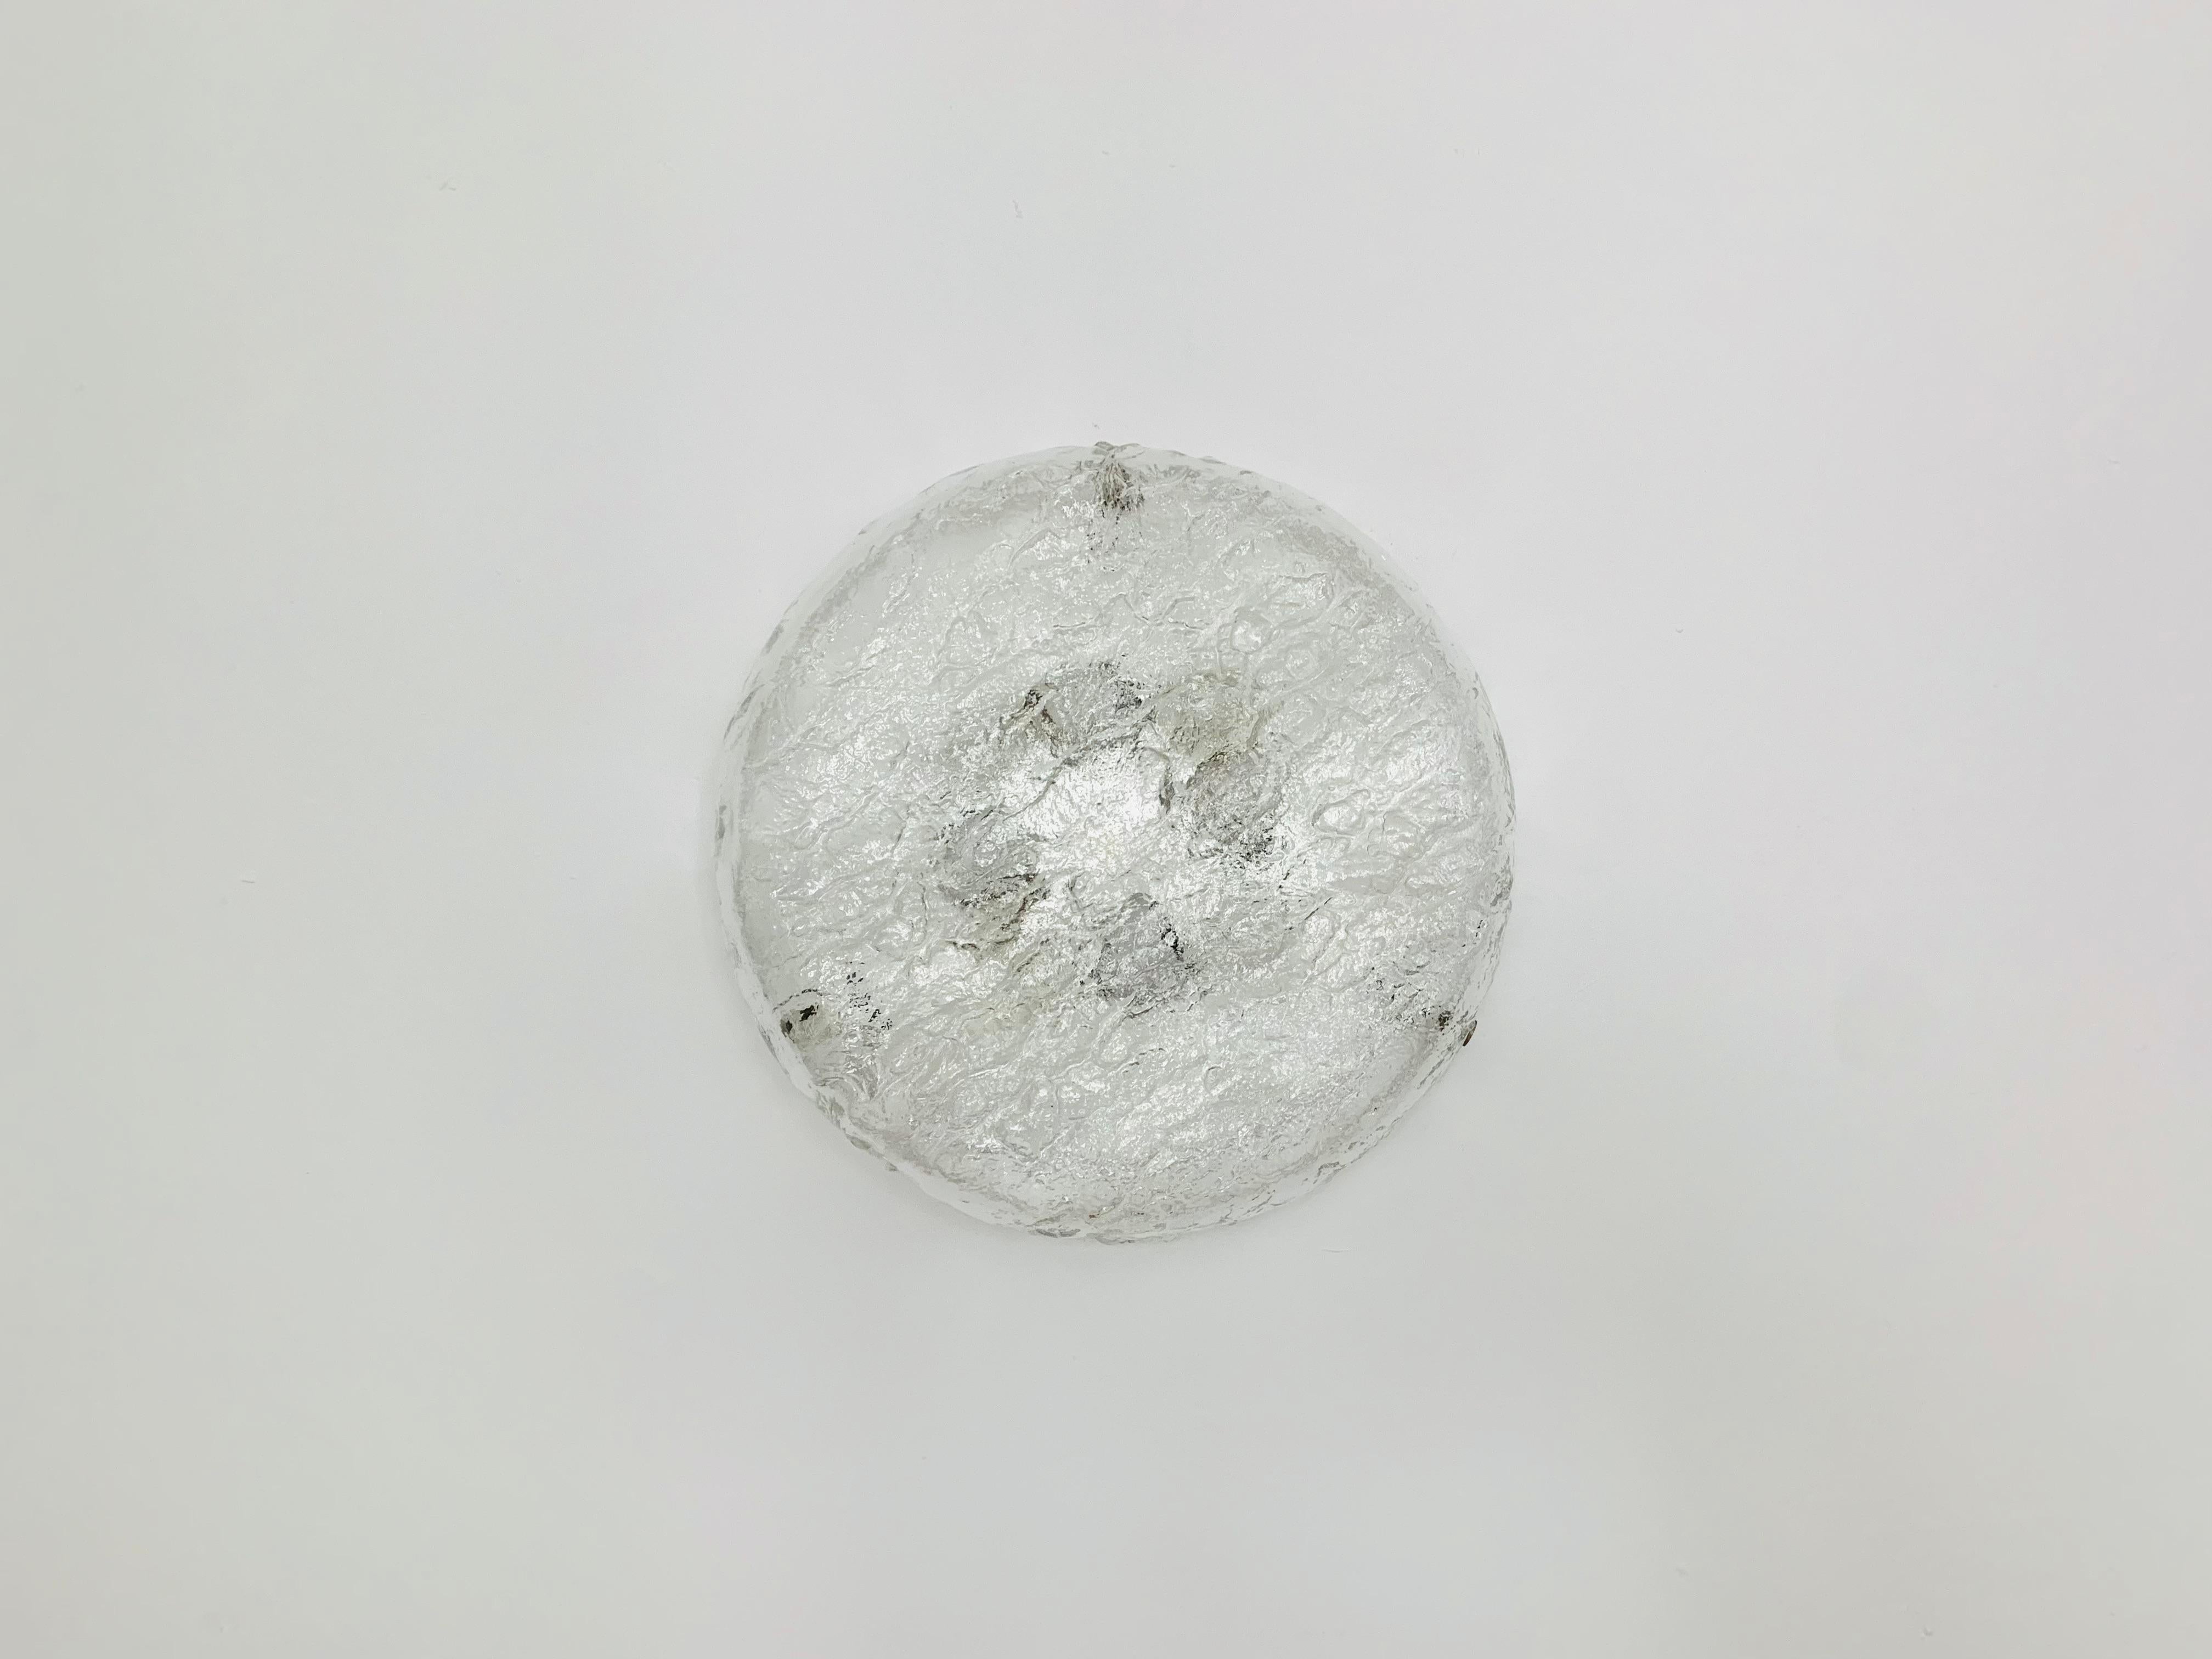 Extremely beautiful ceiling lamp from the 1960s.
Very high-quality workmanship and great design.
A spectacular play of light is created.

Manufacturer: Kaiser Leuchten

Condition:

Very good vintage condition with slight signs of wear consistent